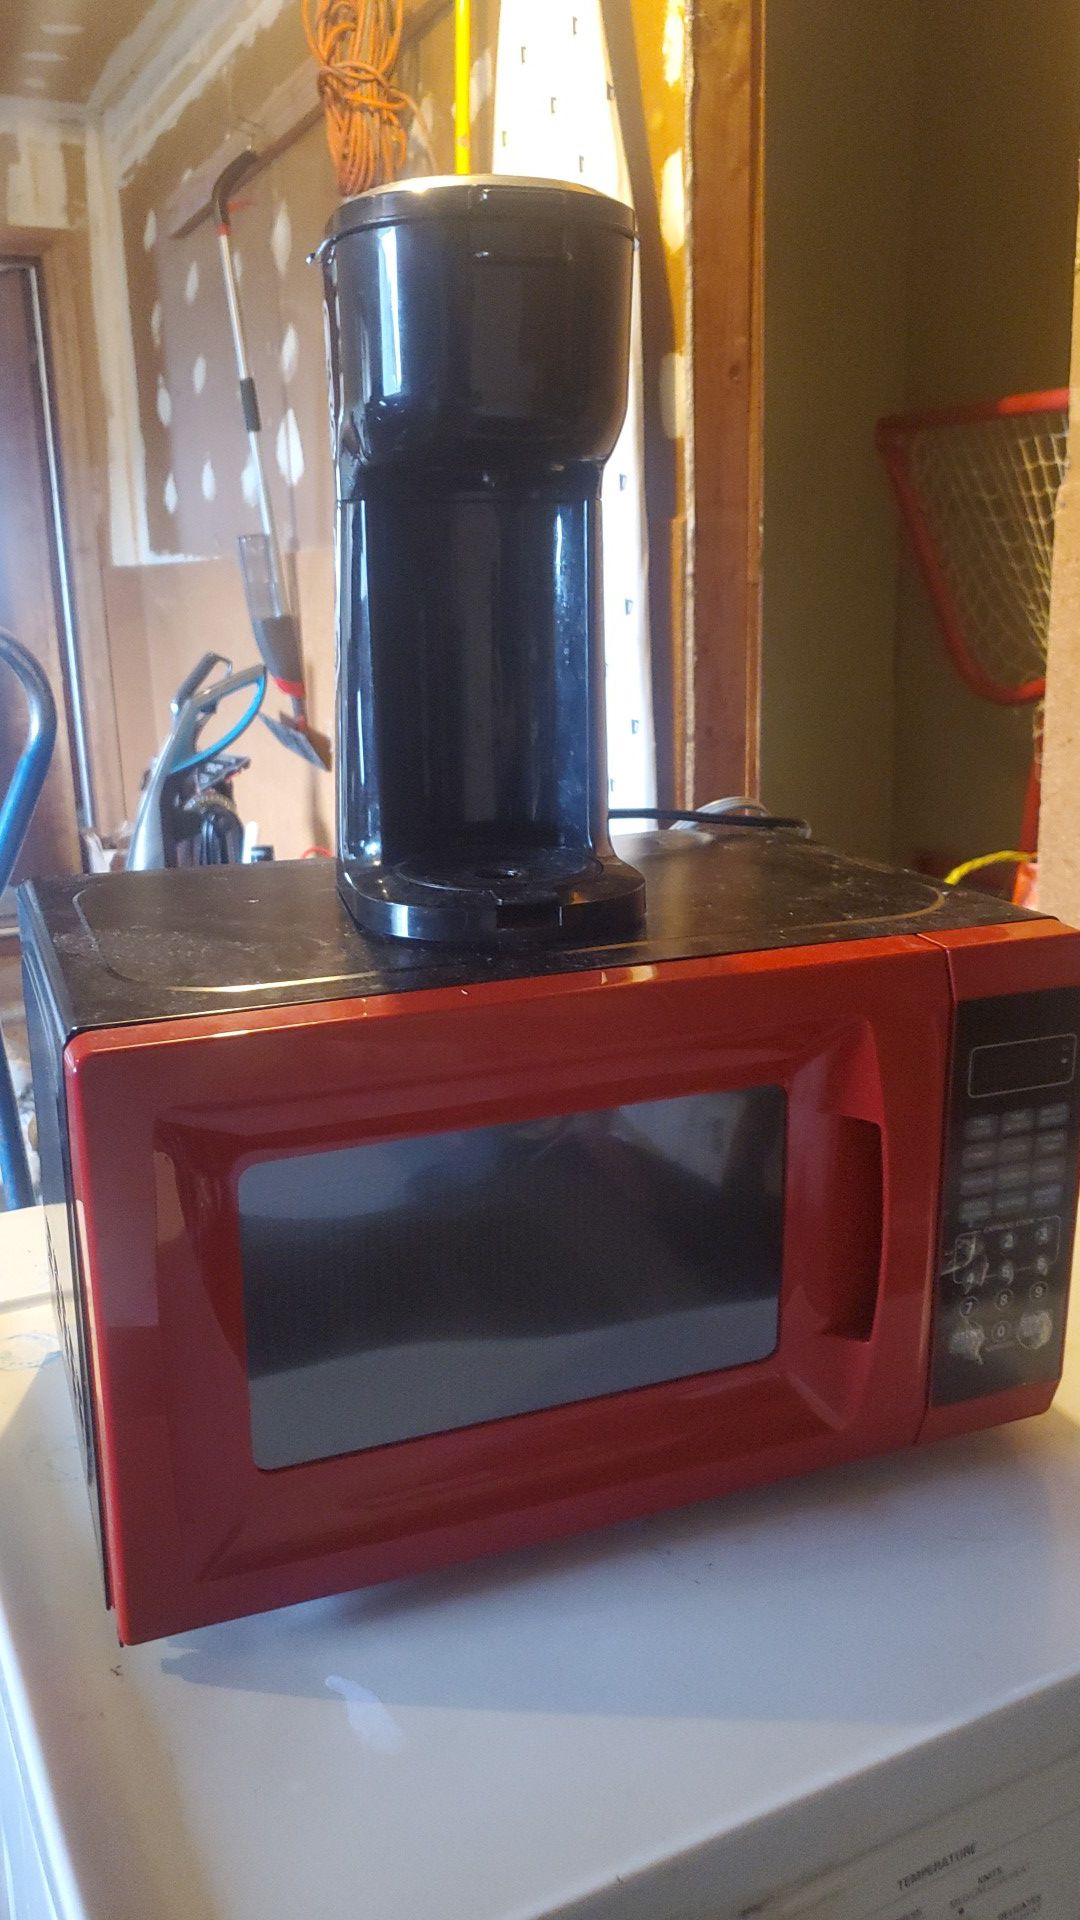 Microwave and coffee maker